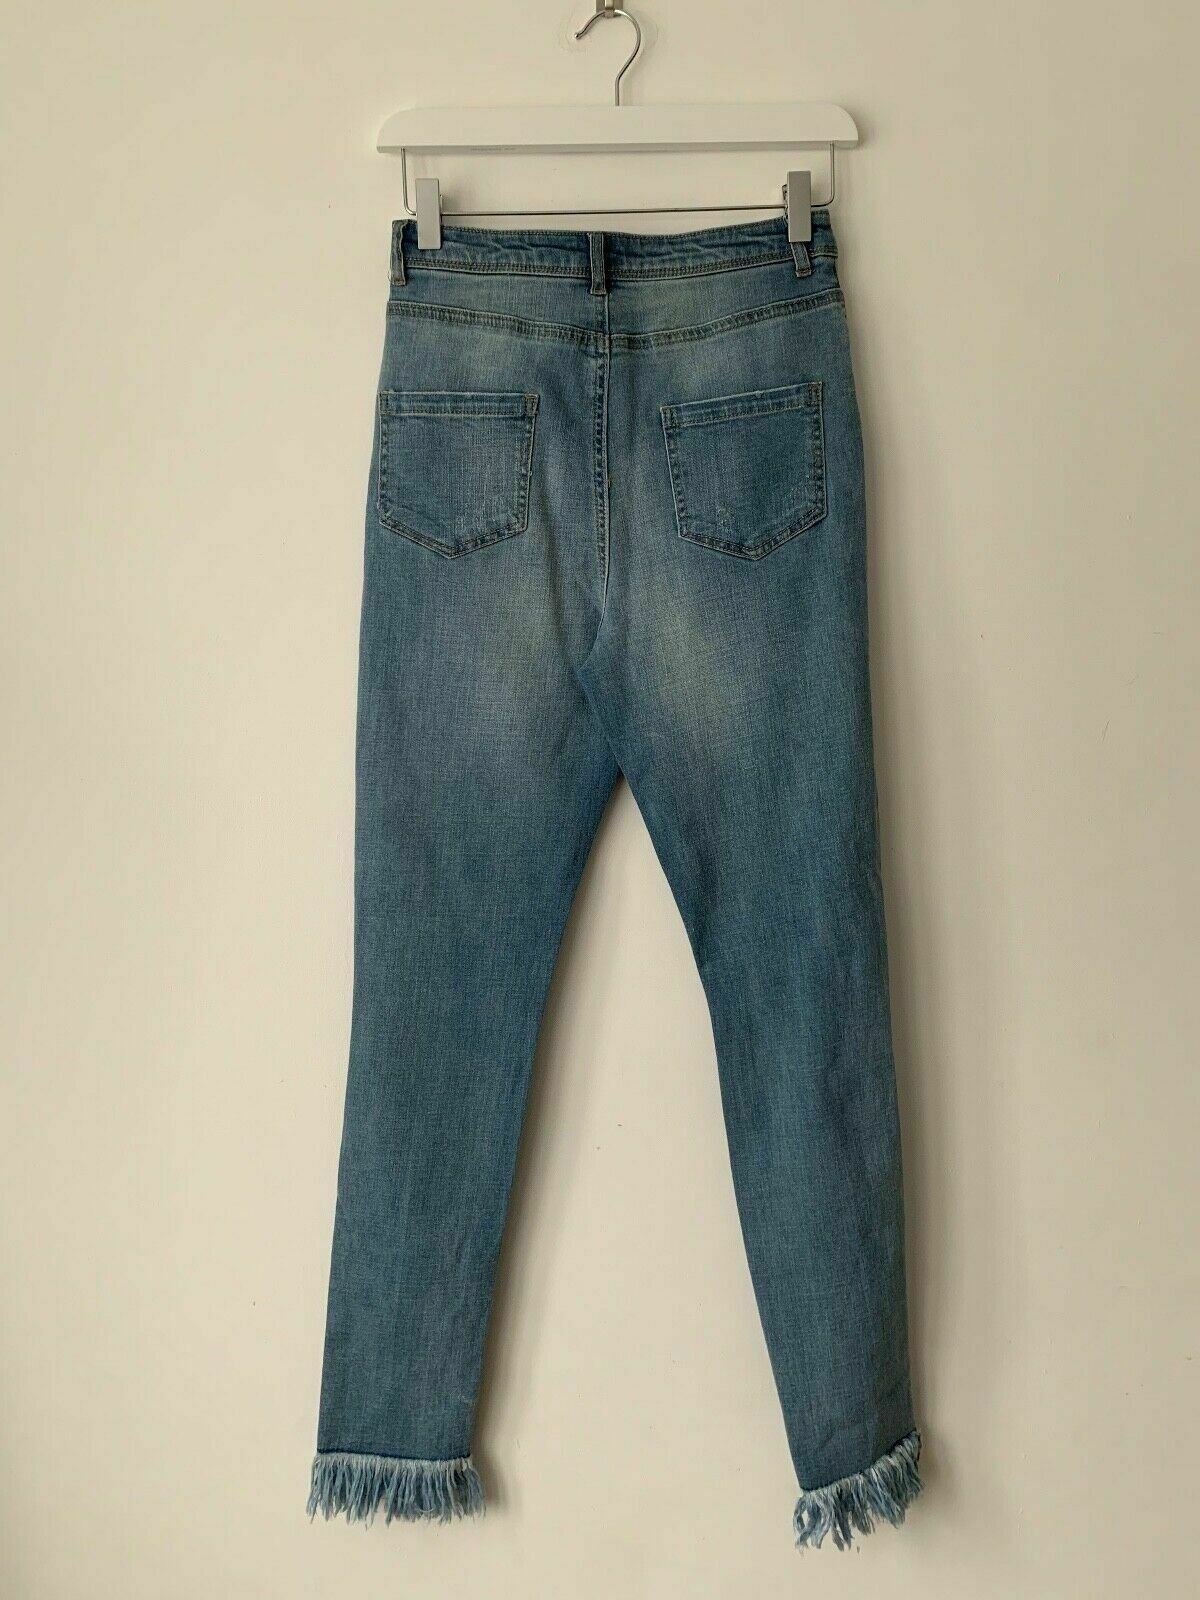 Missguided Sinner High waisted Ripped Fray Hem Skinny Blue Jeans Size 10 W28